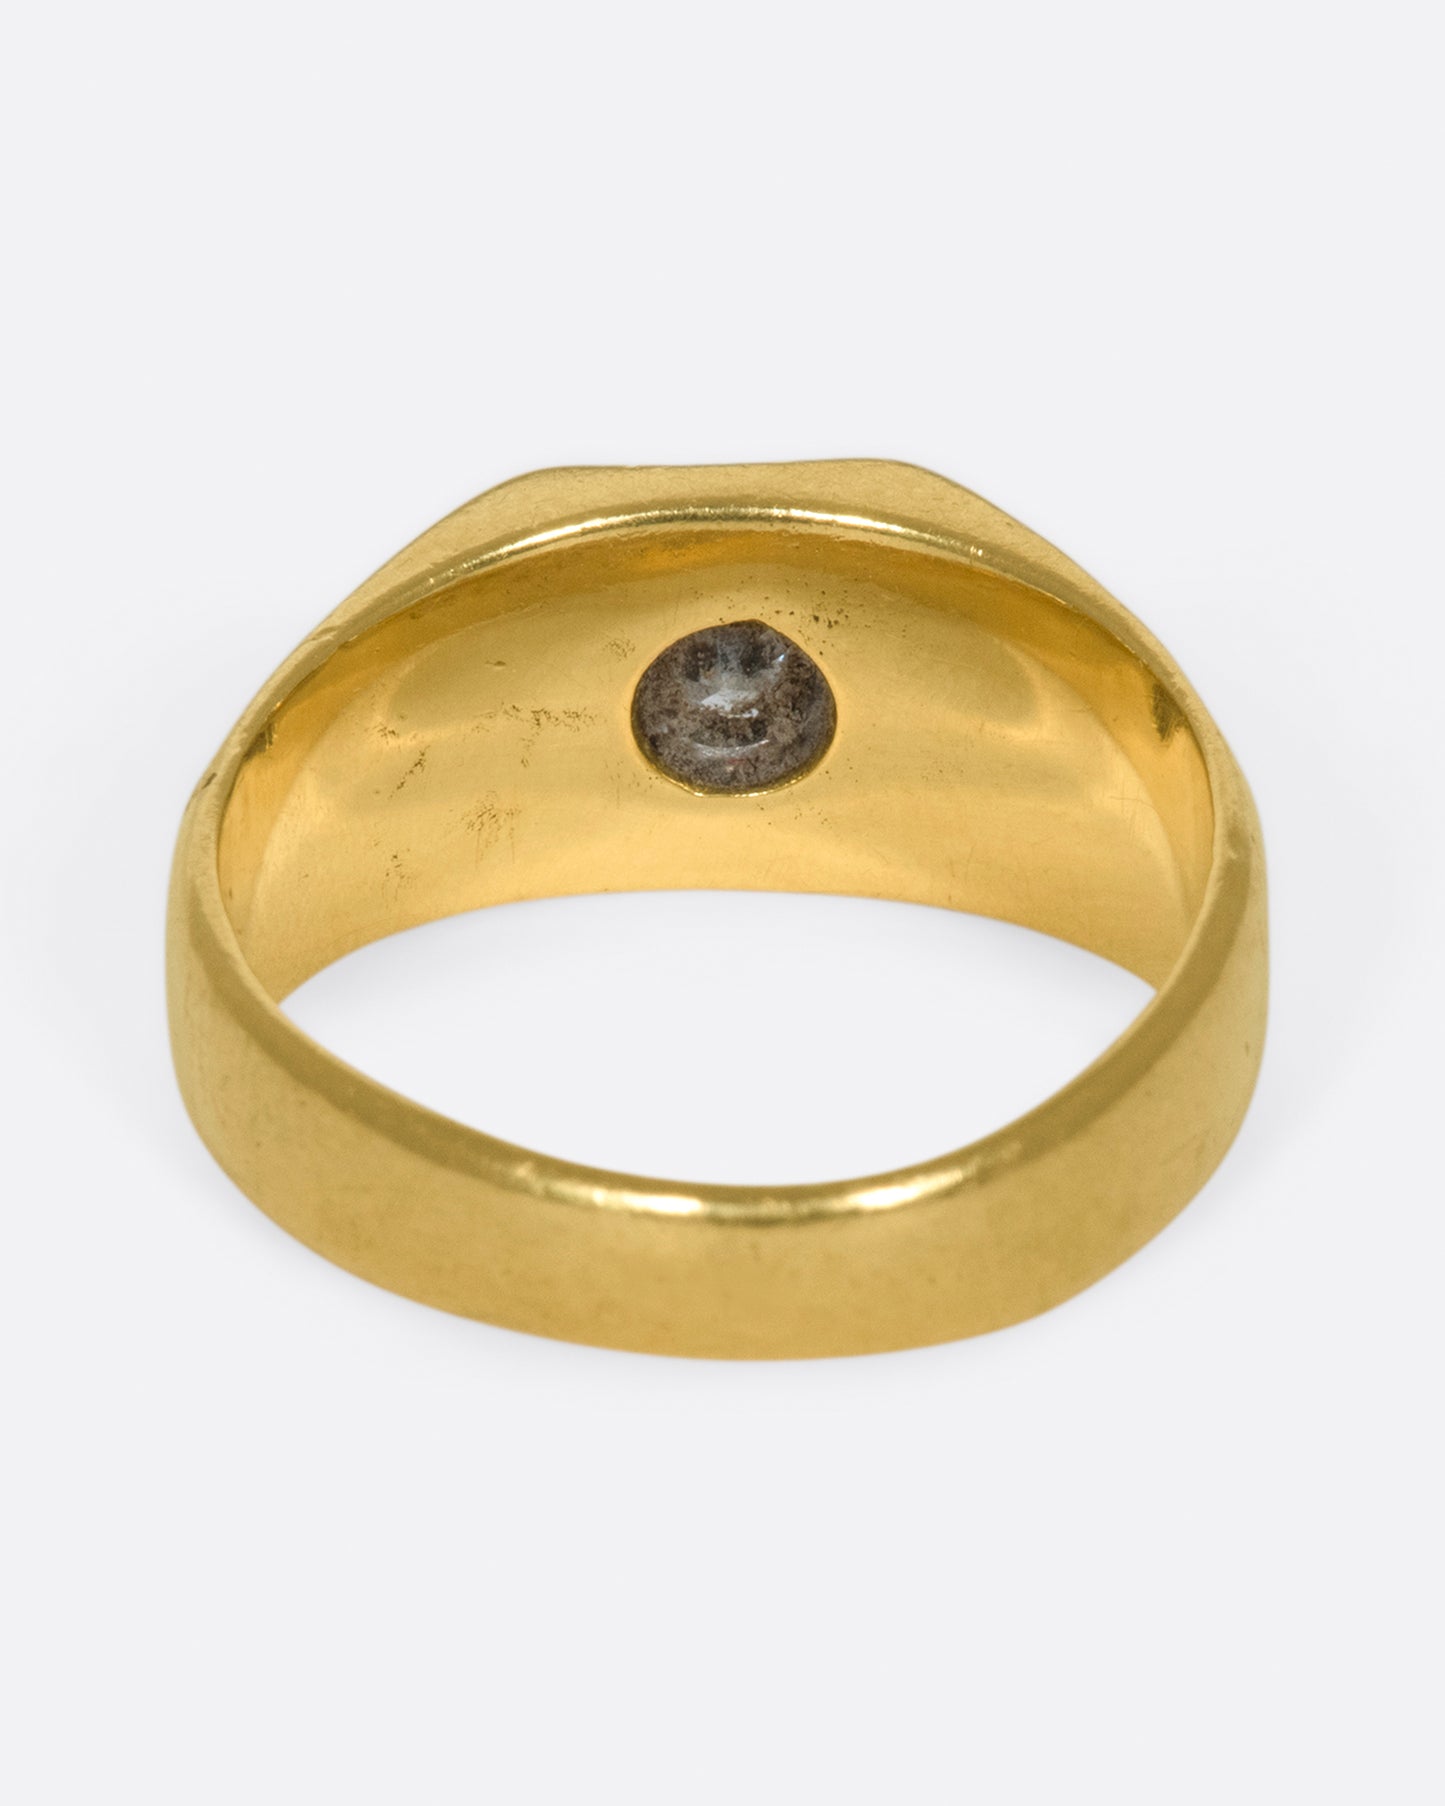 A vintage gold signet ring with a sunken diamond at its center.